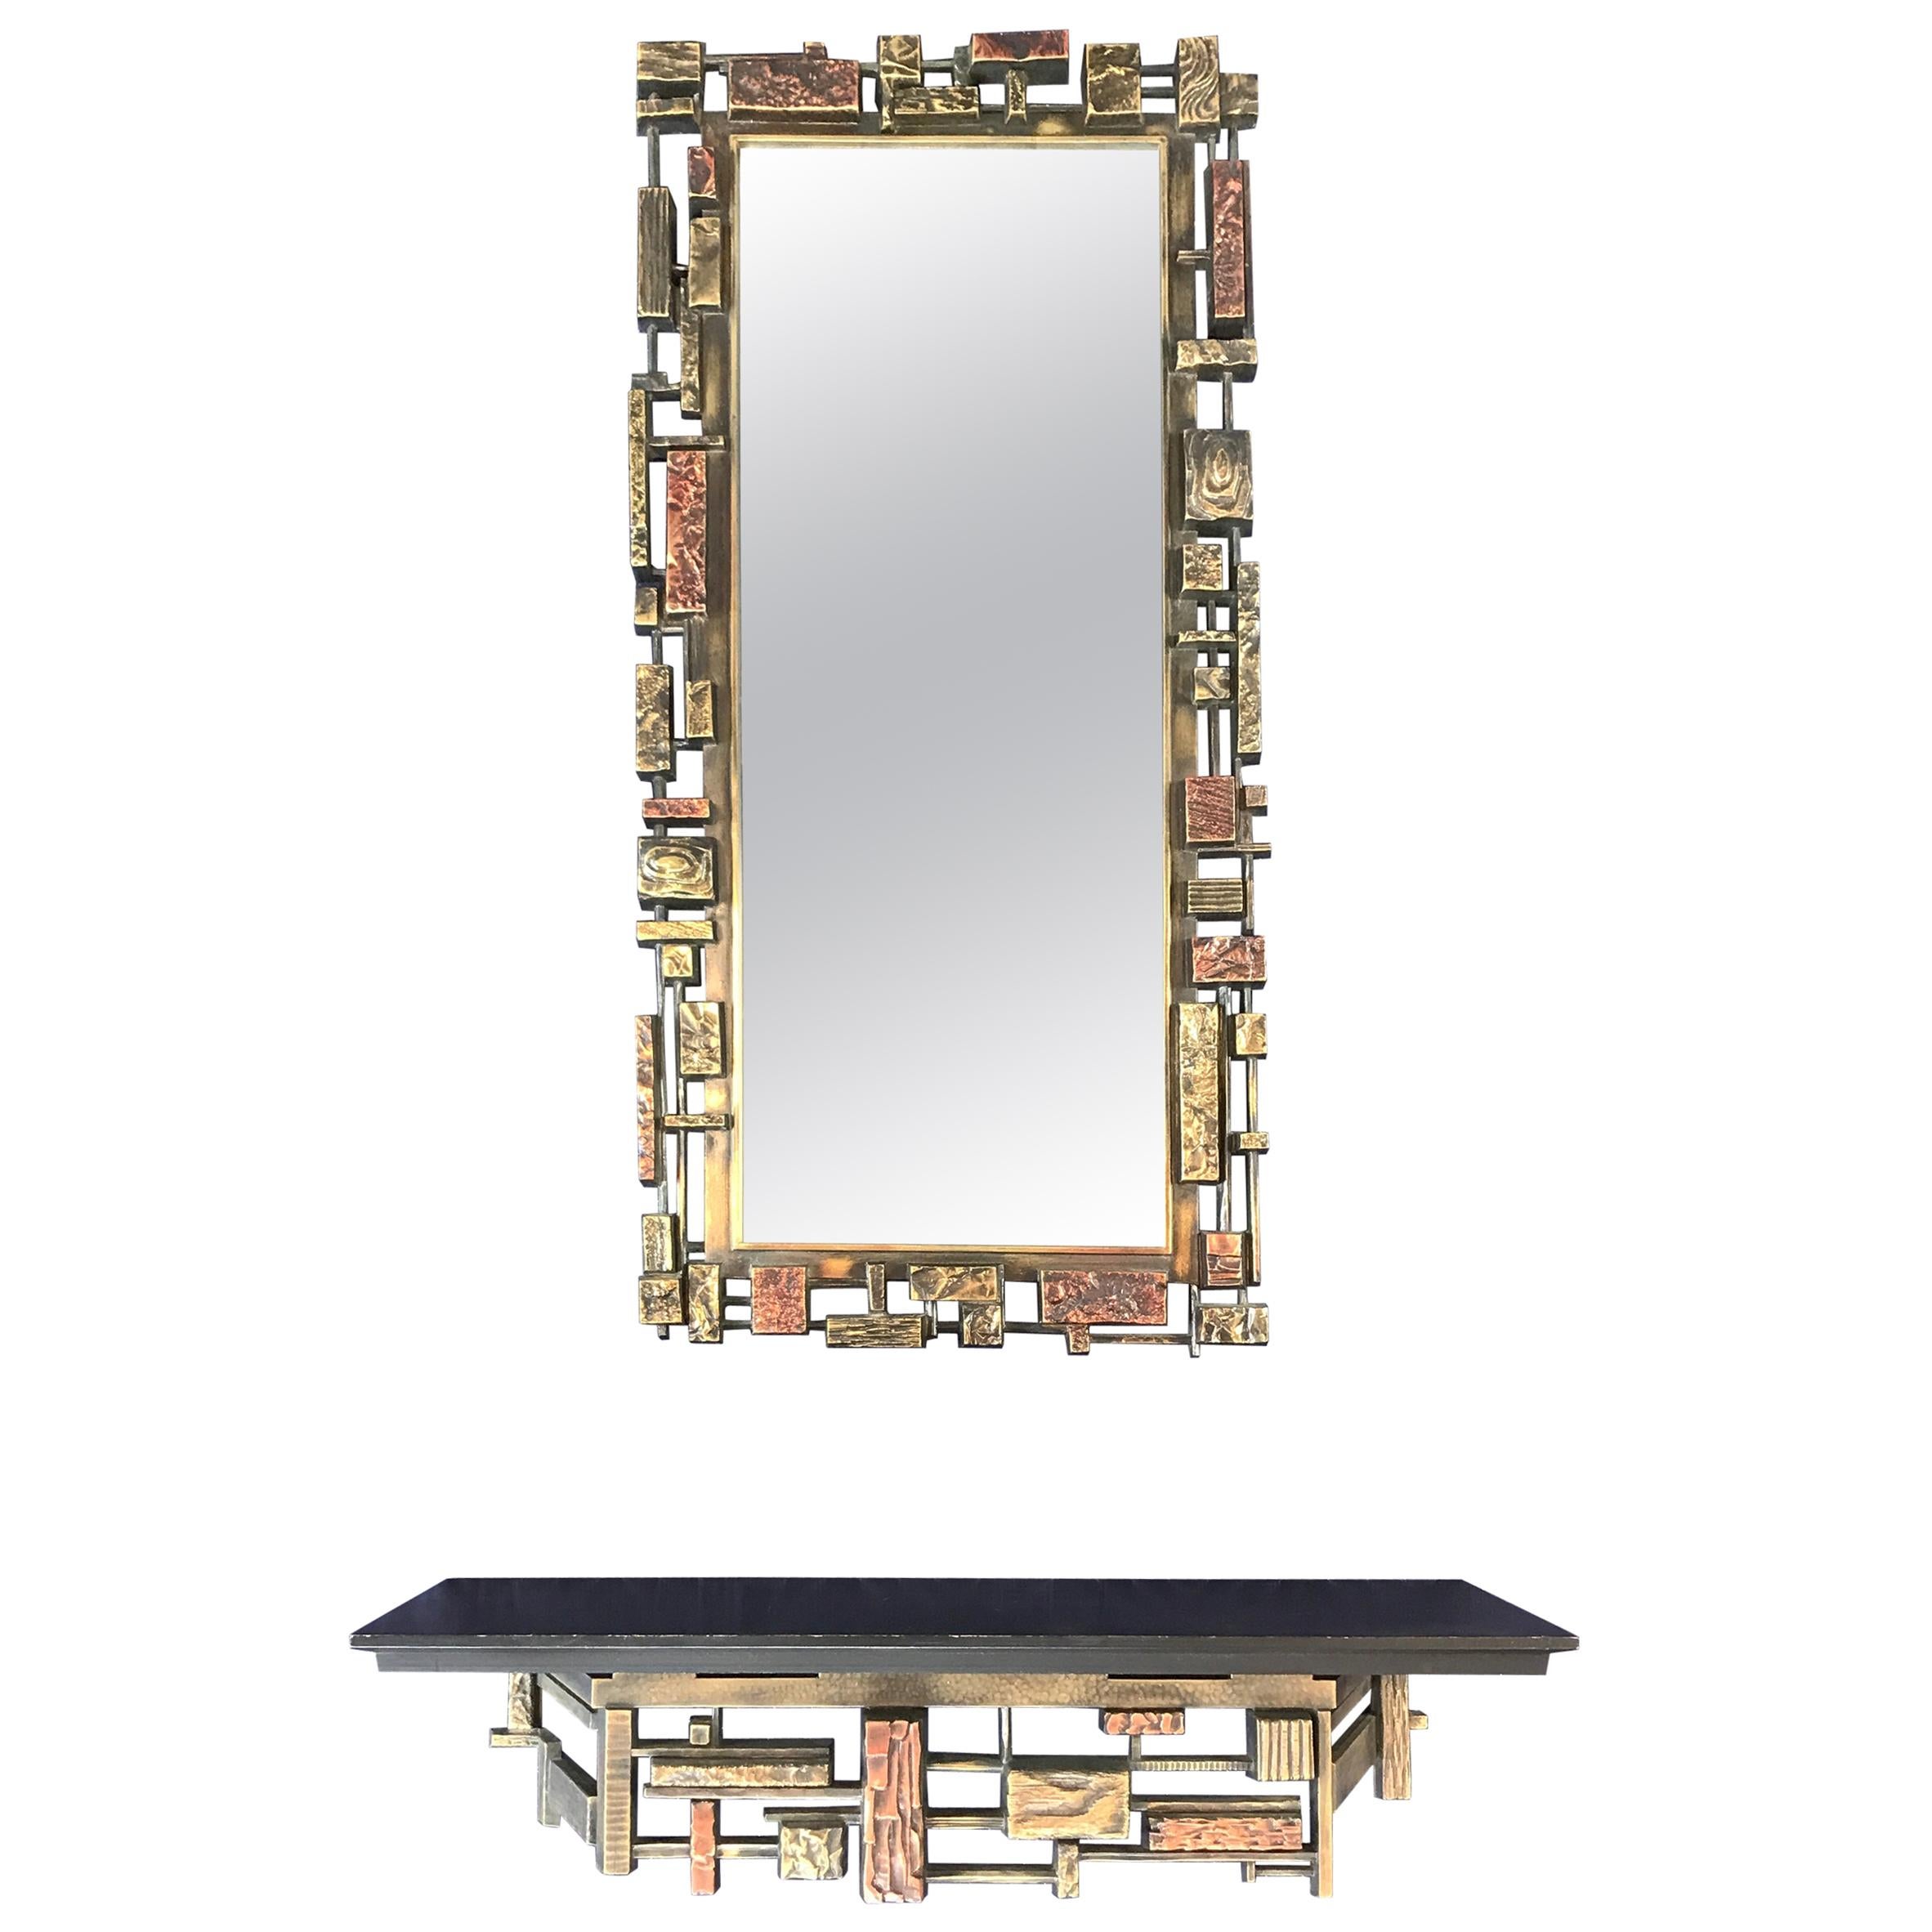 Syroco Brutalist Wall Mirror with Matching Brutalist Shelf Copper, Gold, Black